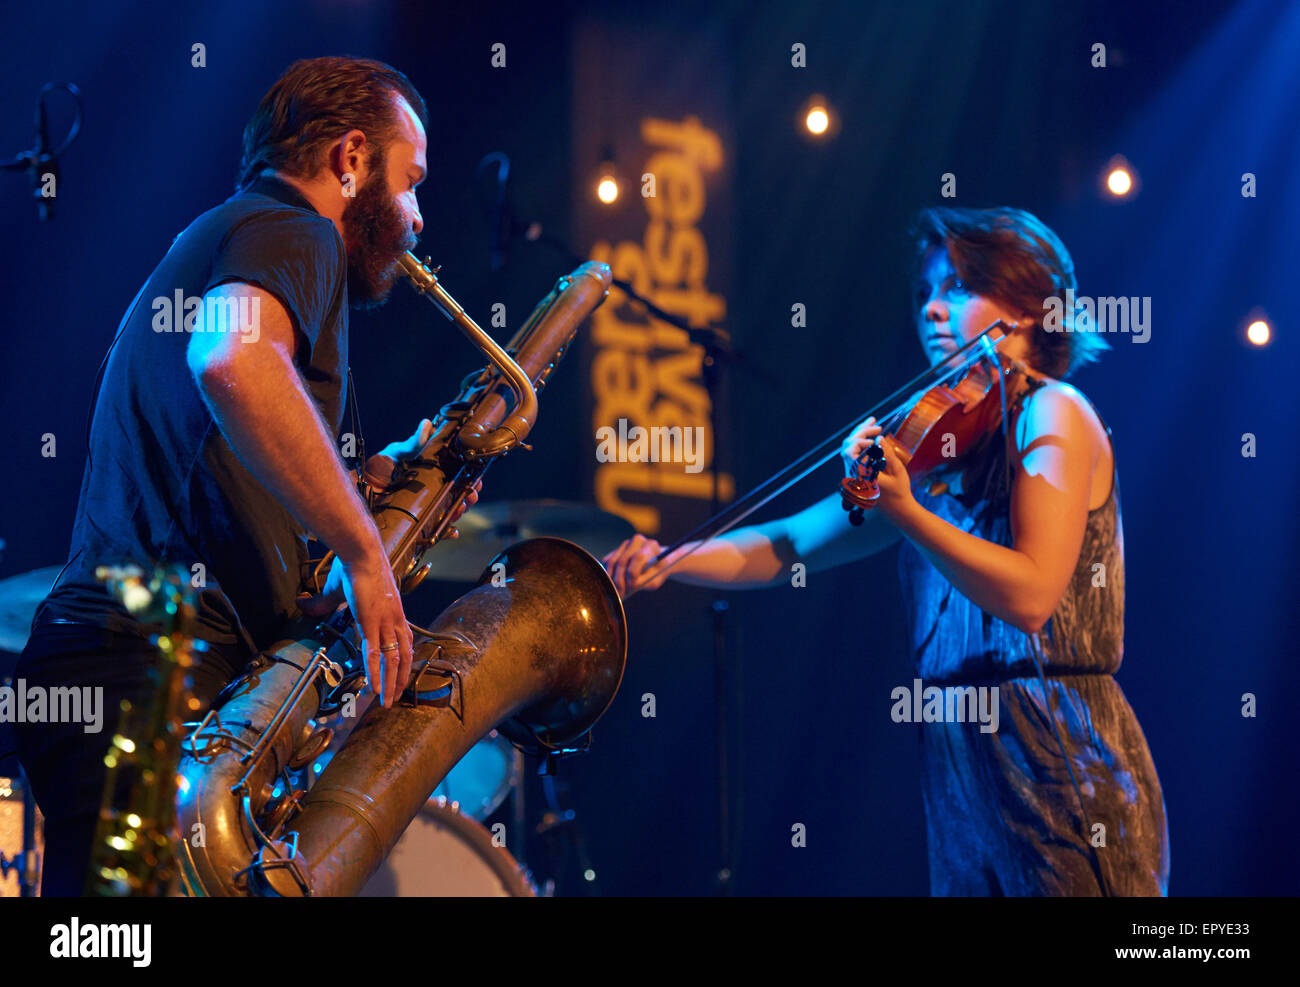 Colin stetson and sarah neufeld hi-res stock photography and images - Alamy